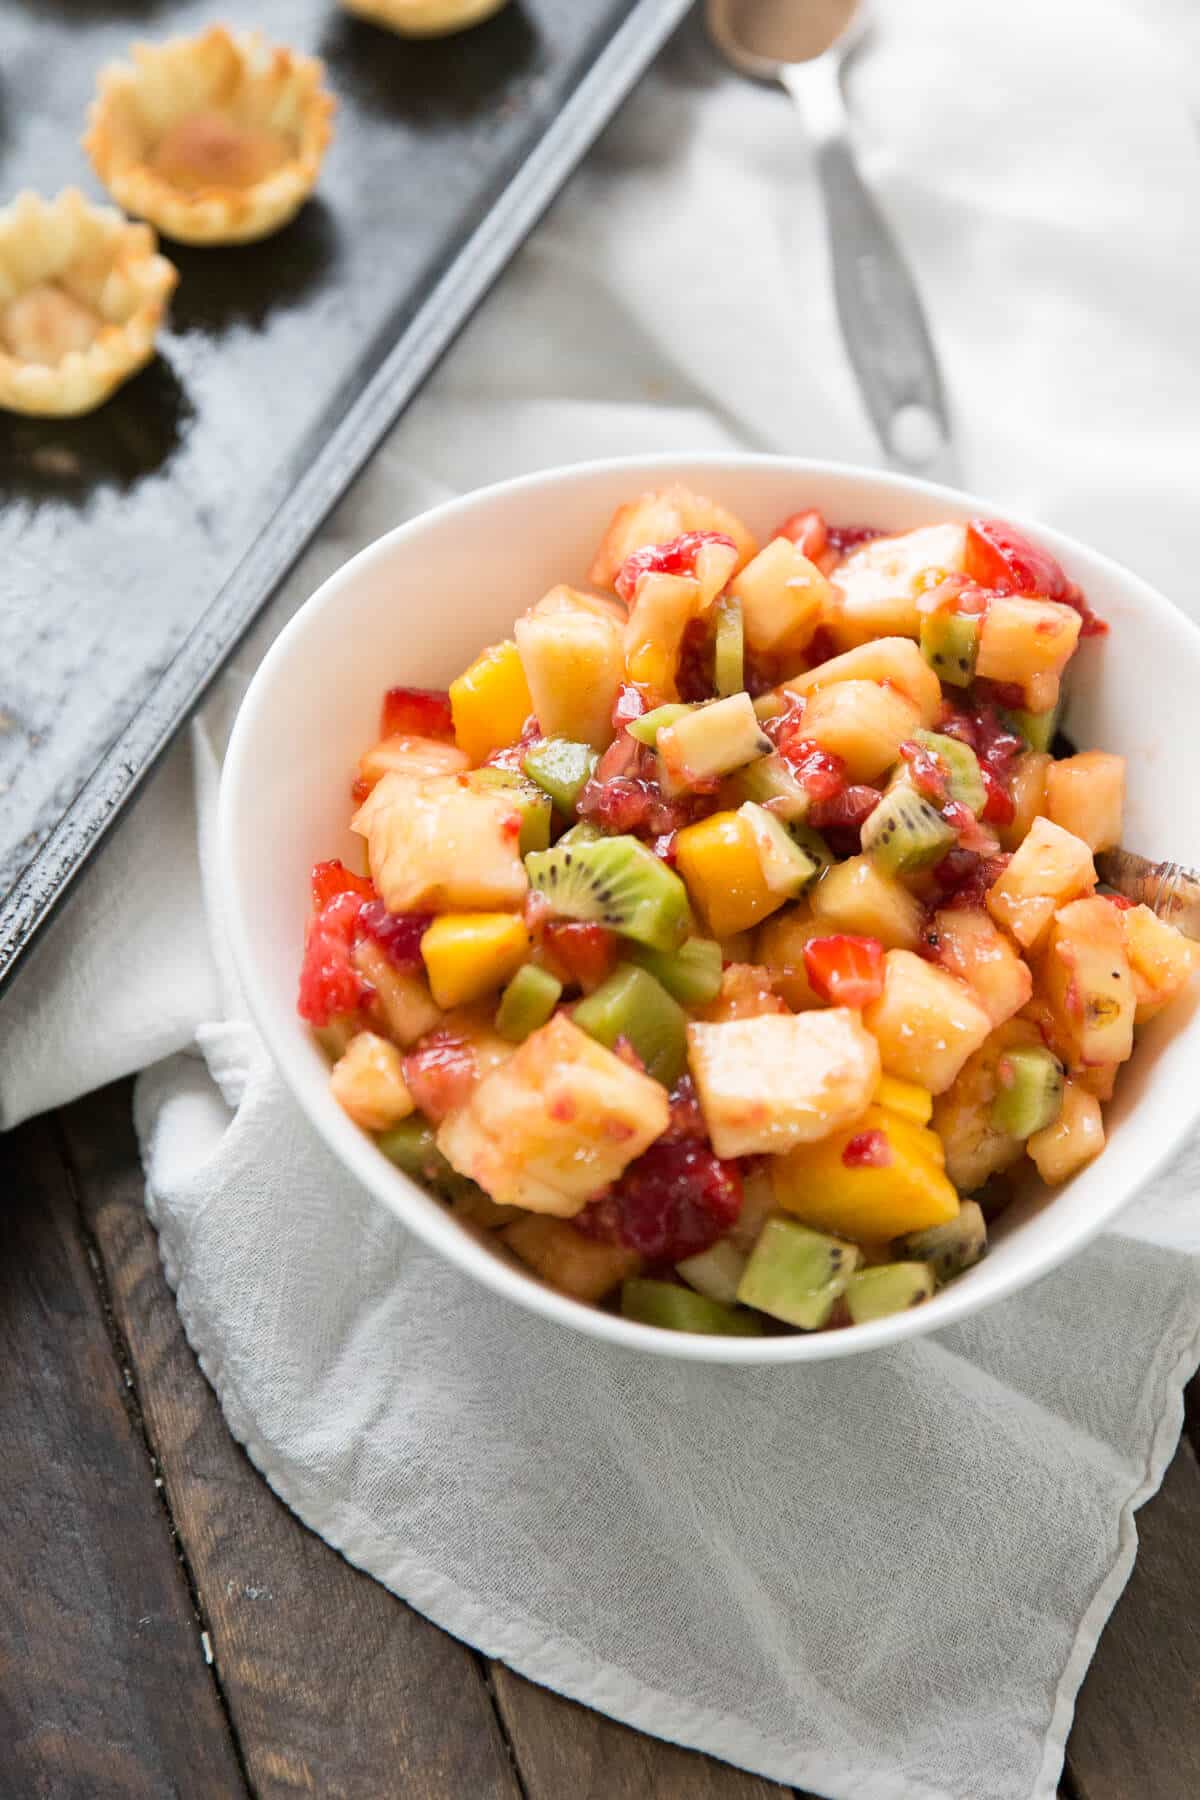 Fruit salsa is loved by all, but thee tropical fruit salsa cups are going to make you forget any other fruit salsa recipe!